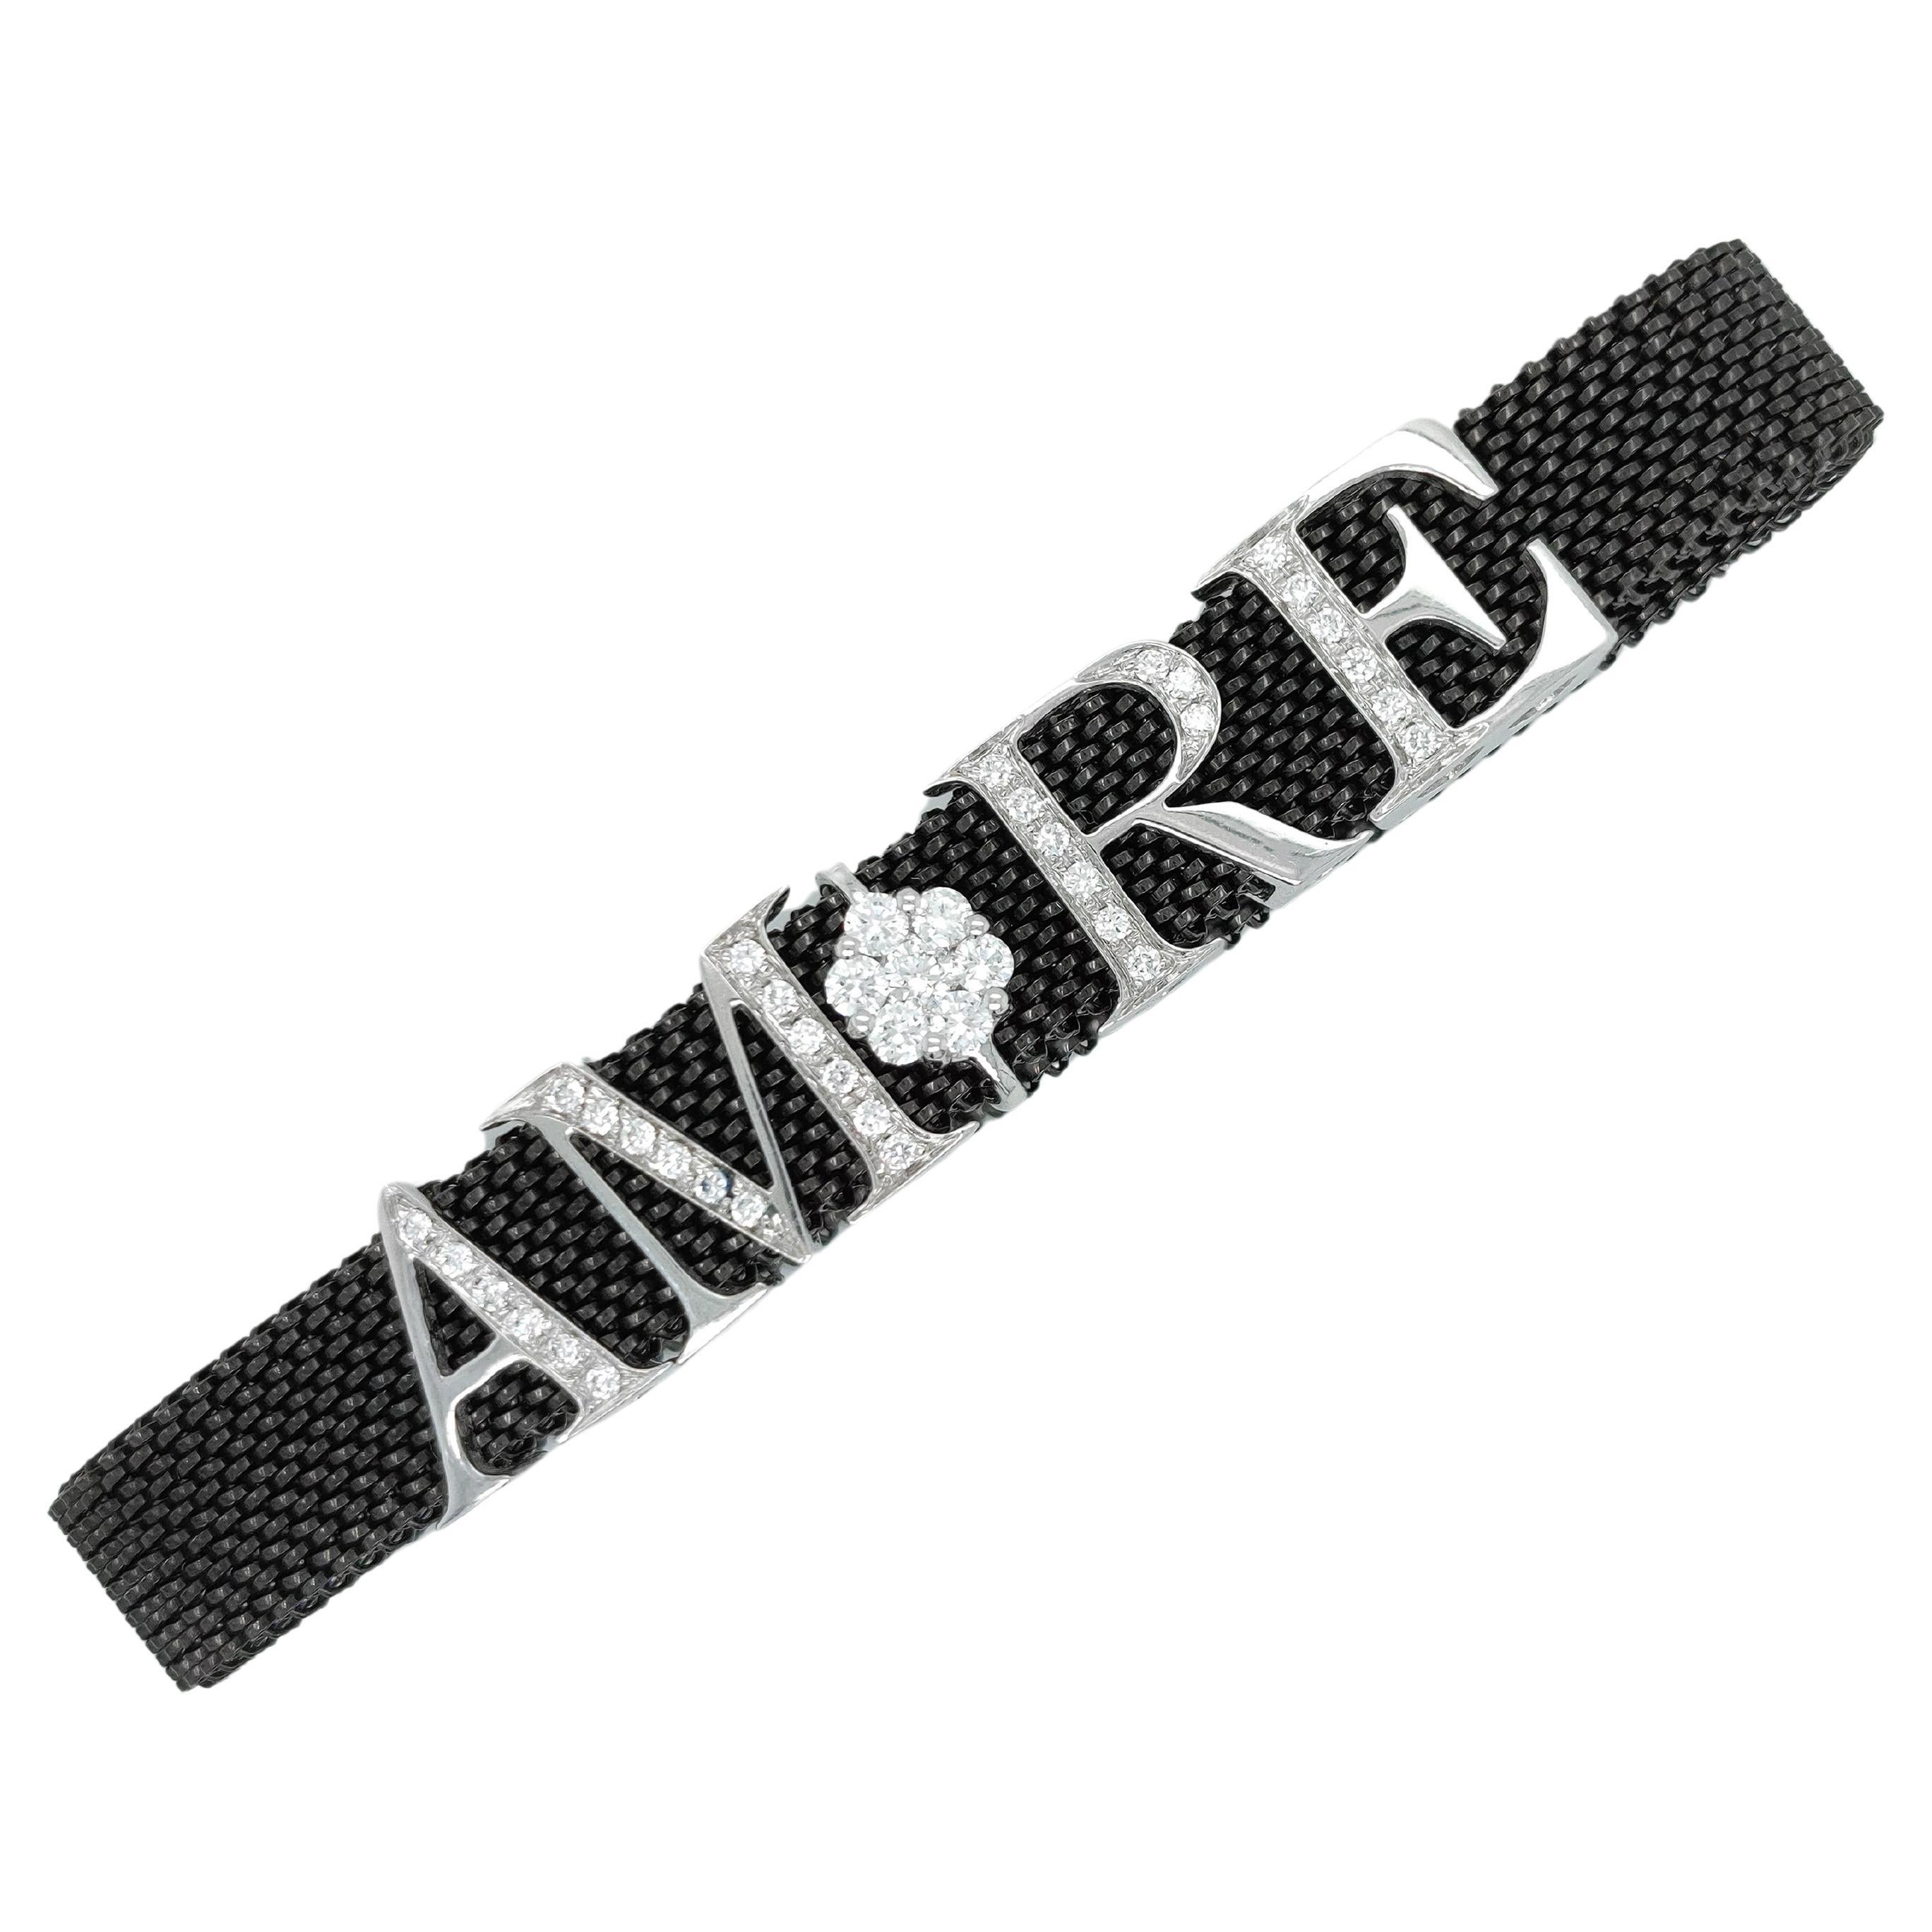 Elastic Bracelet in Black steel and Amore gold letters & diamonds